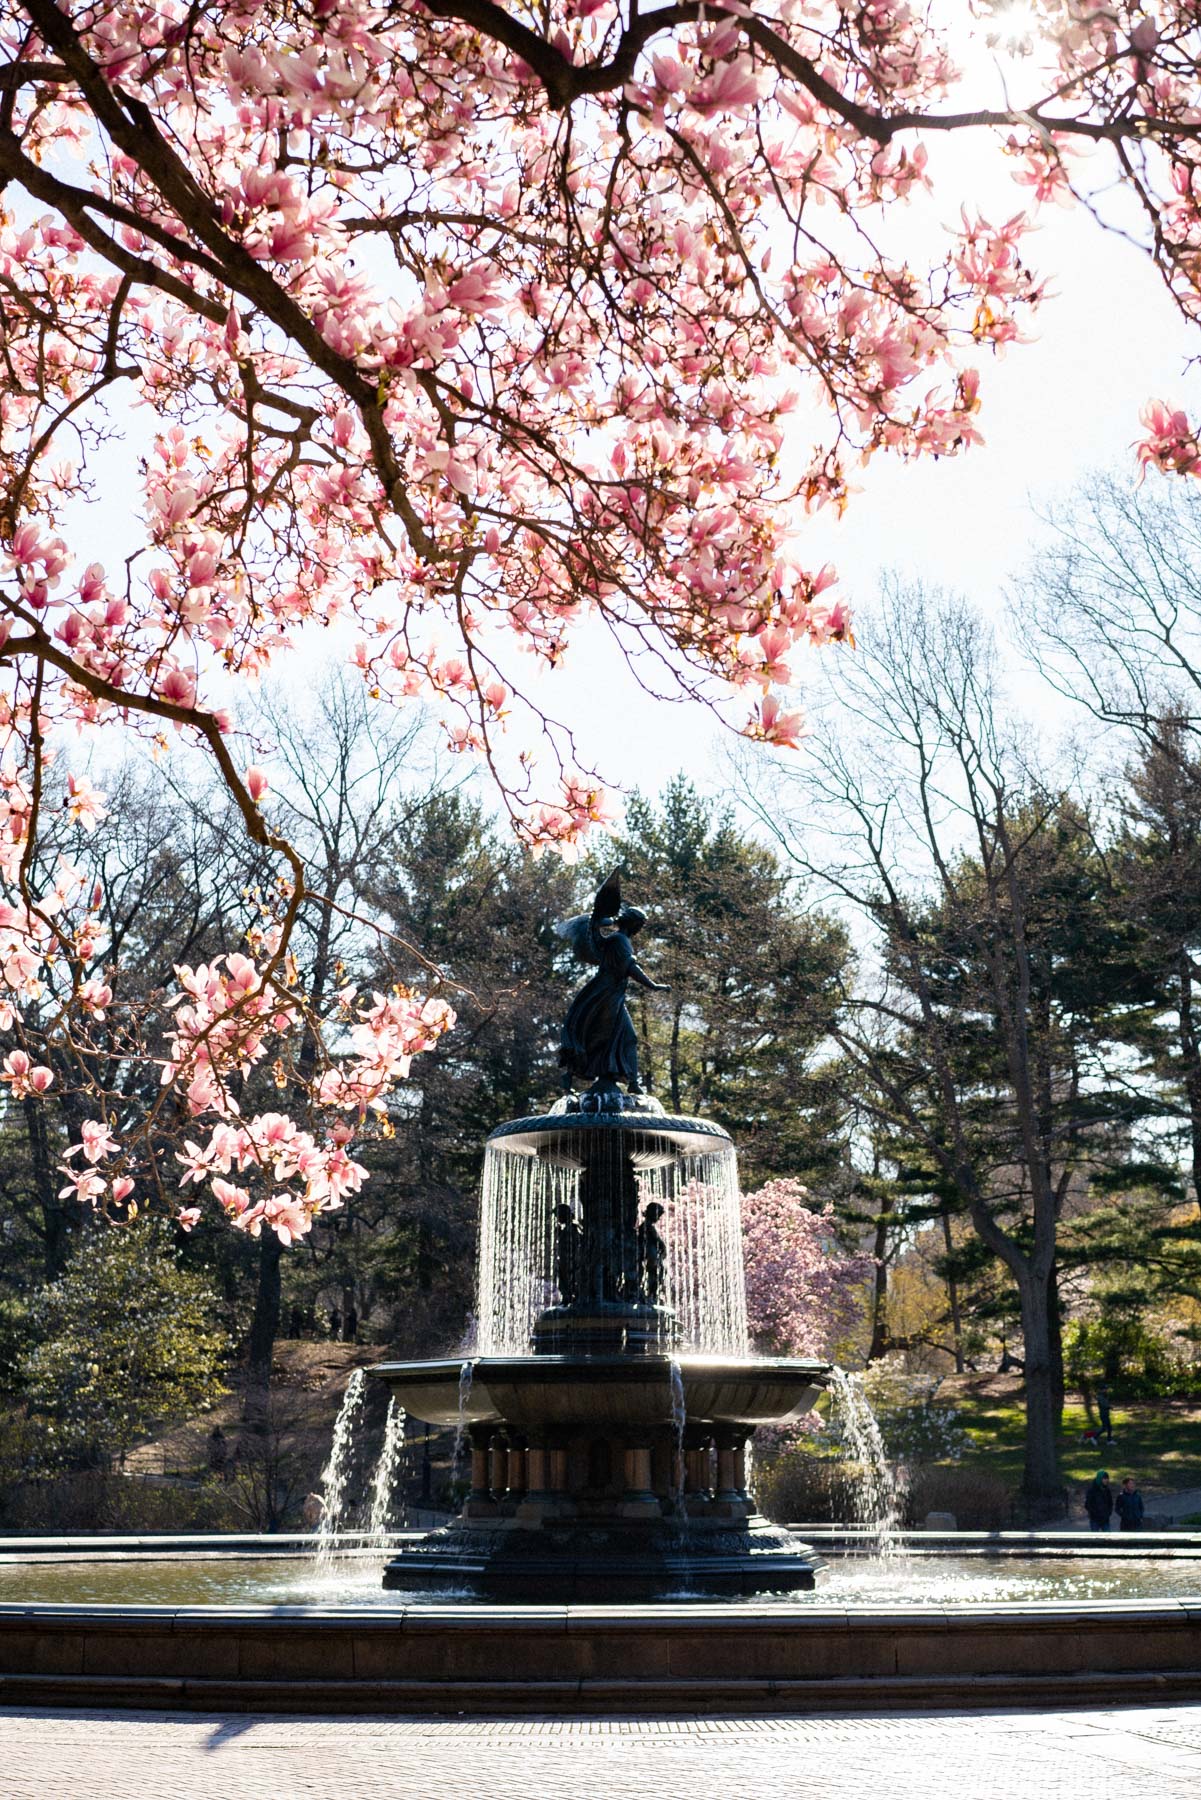 Cherry blossoms in Central Park, Bethesda Fountain